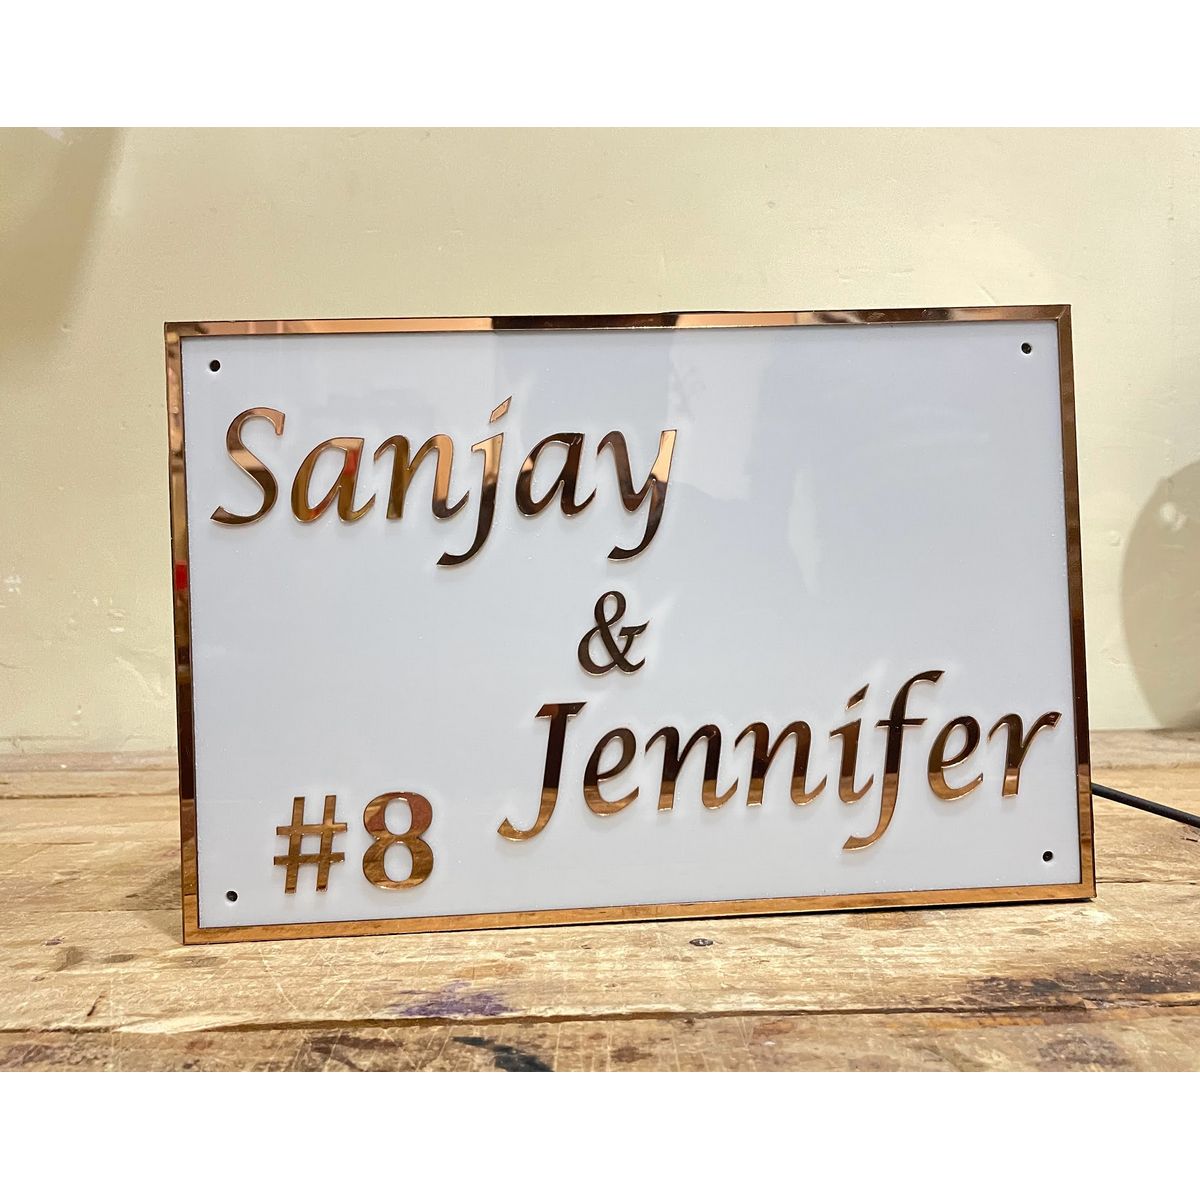 Rose Gold Acrylic LED Name Plate - Personalized Home Decor | My Interior Factory